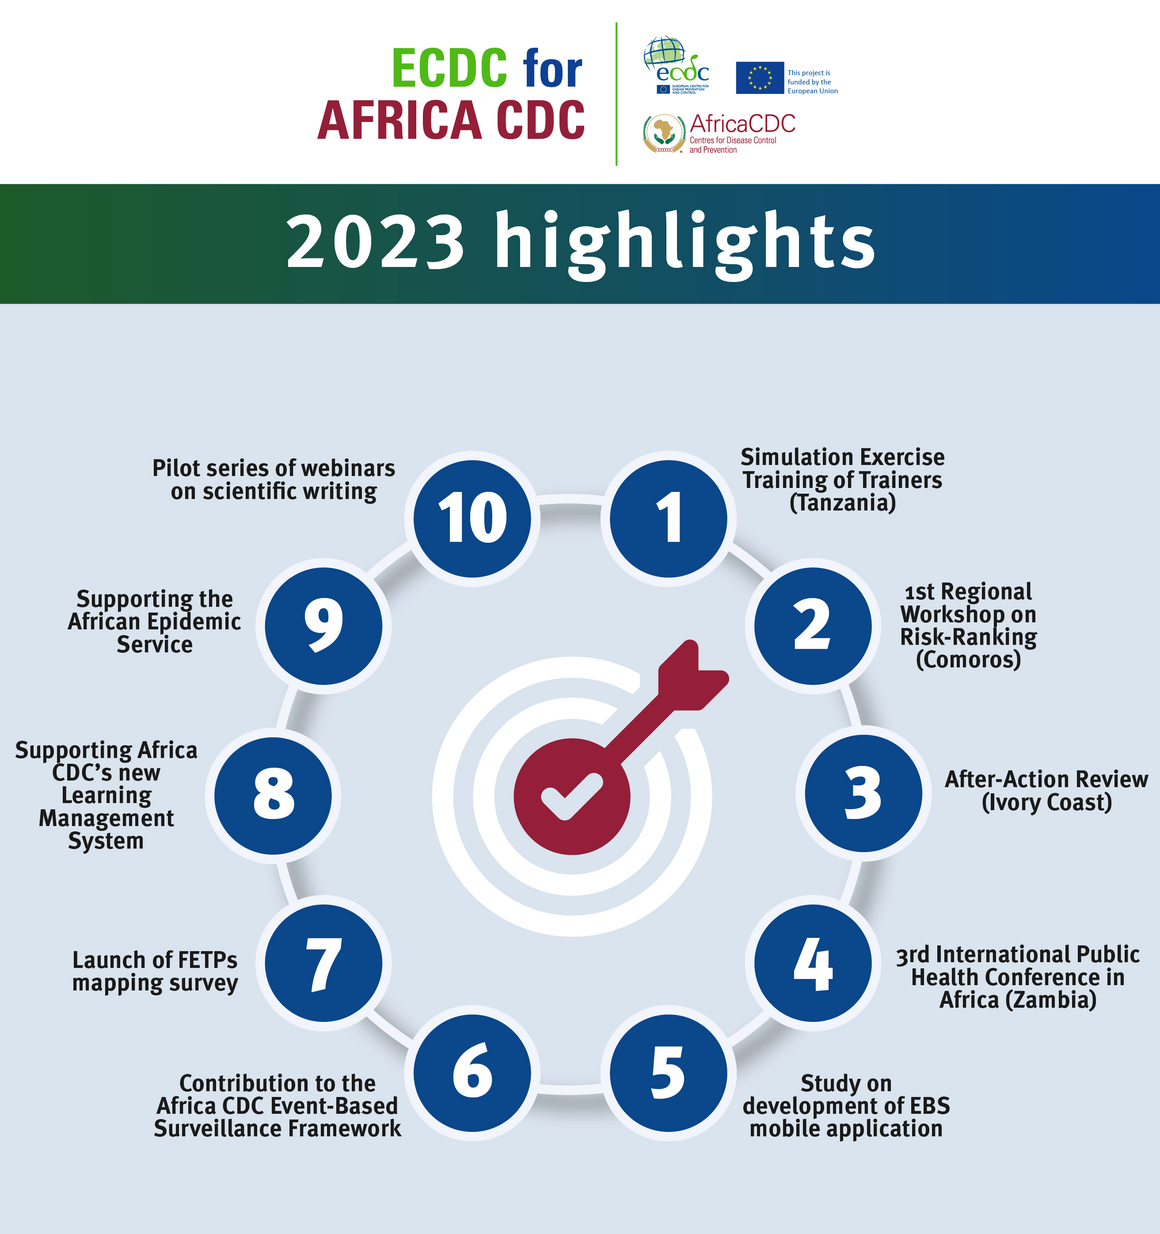 ECDC for Africa CDC - 2023 highlights